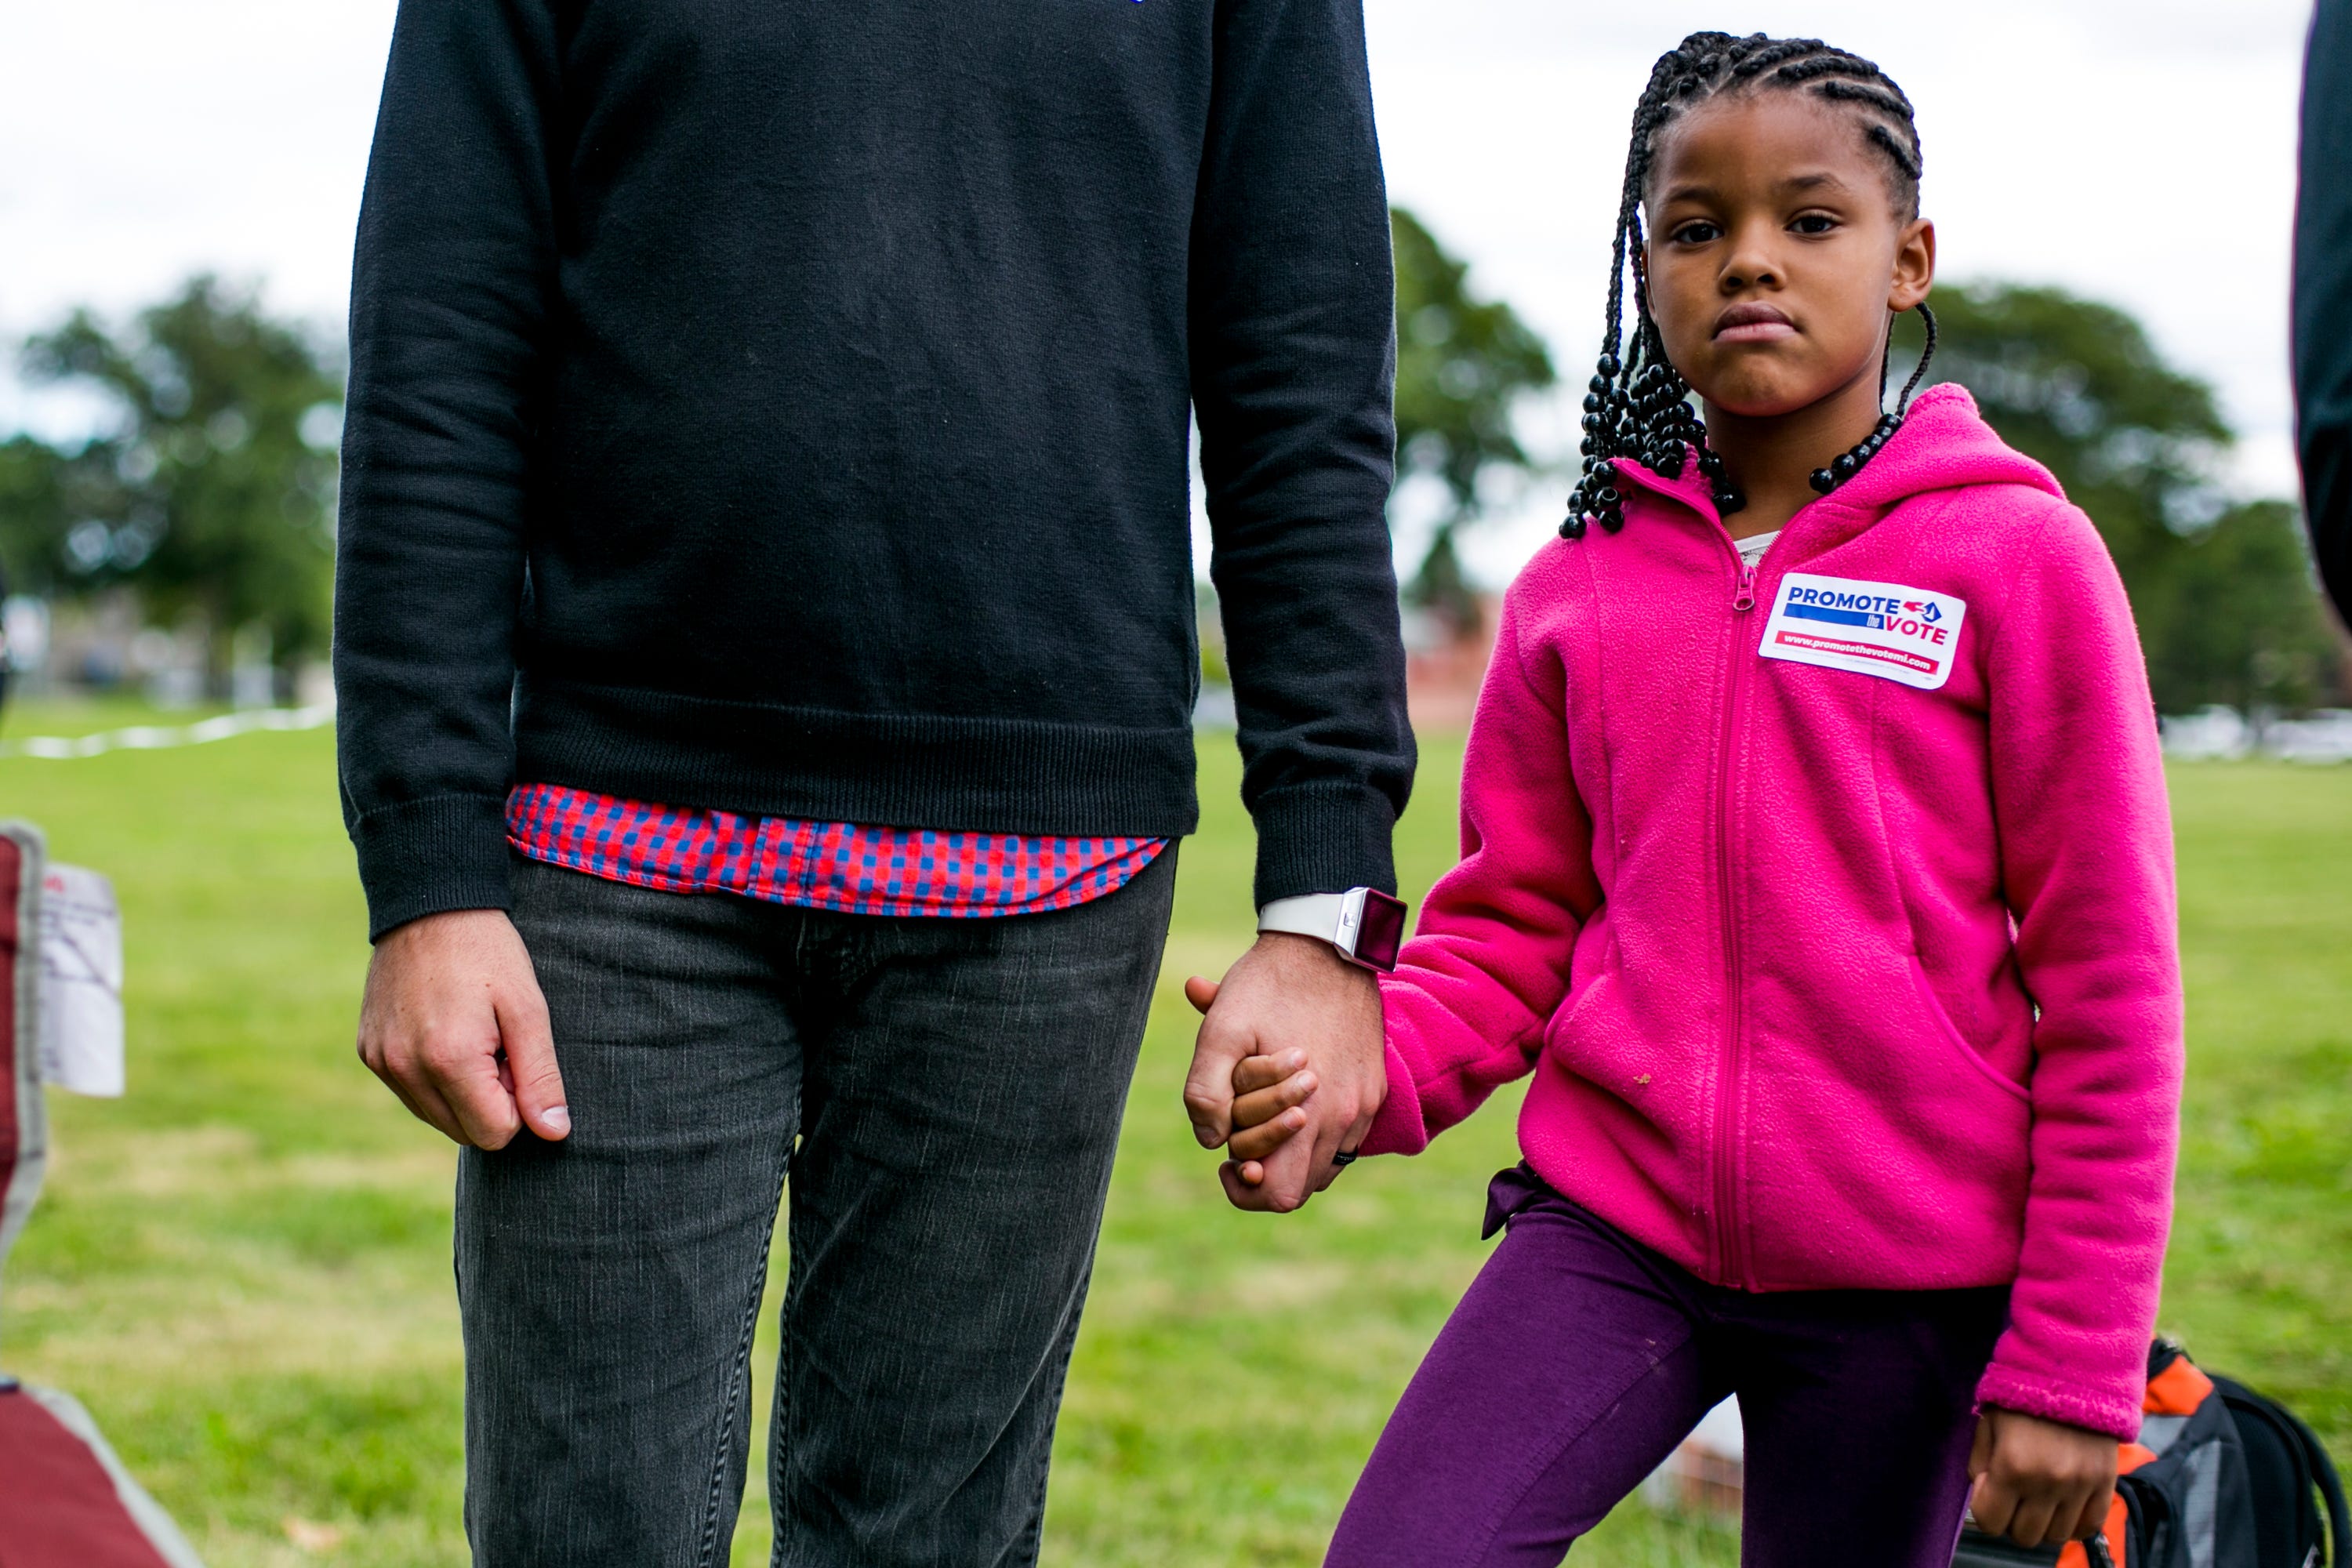 Arleana Jackson, 7, of Livonia holds her step father's hand during the Slut Walk at Palmer Park in Detroit on September 22, 2018.